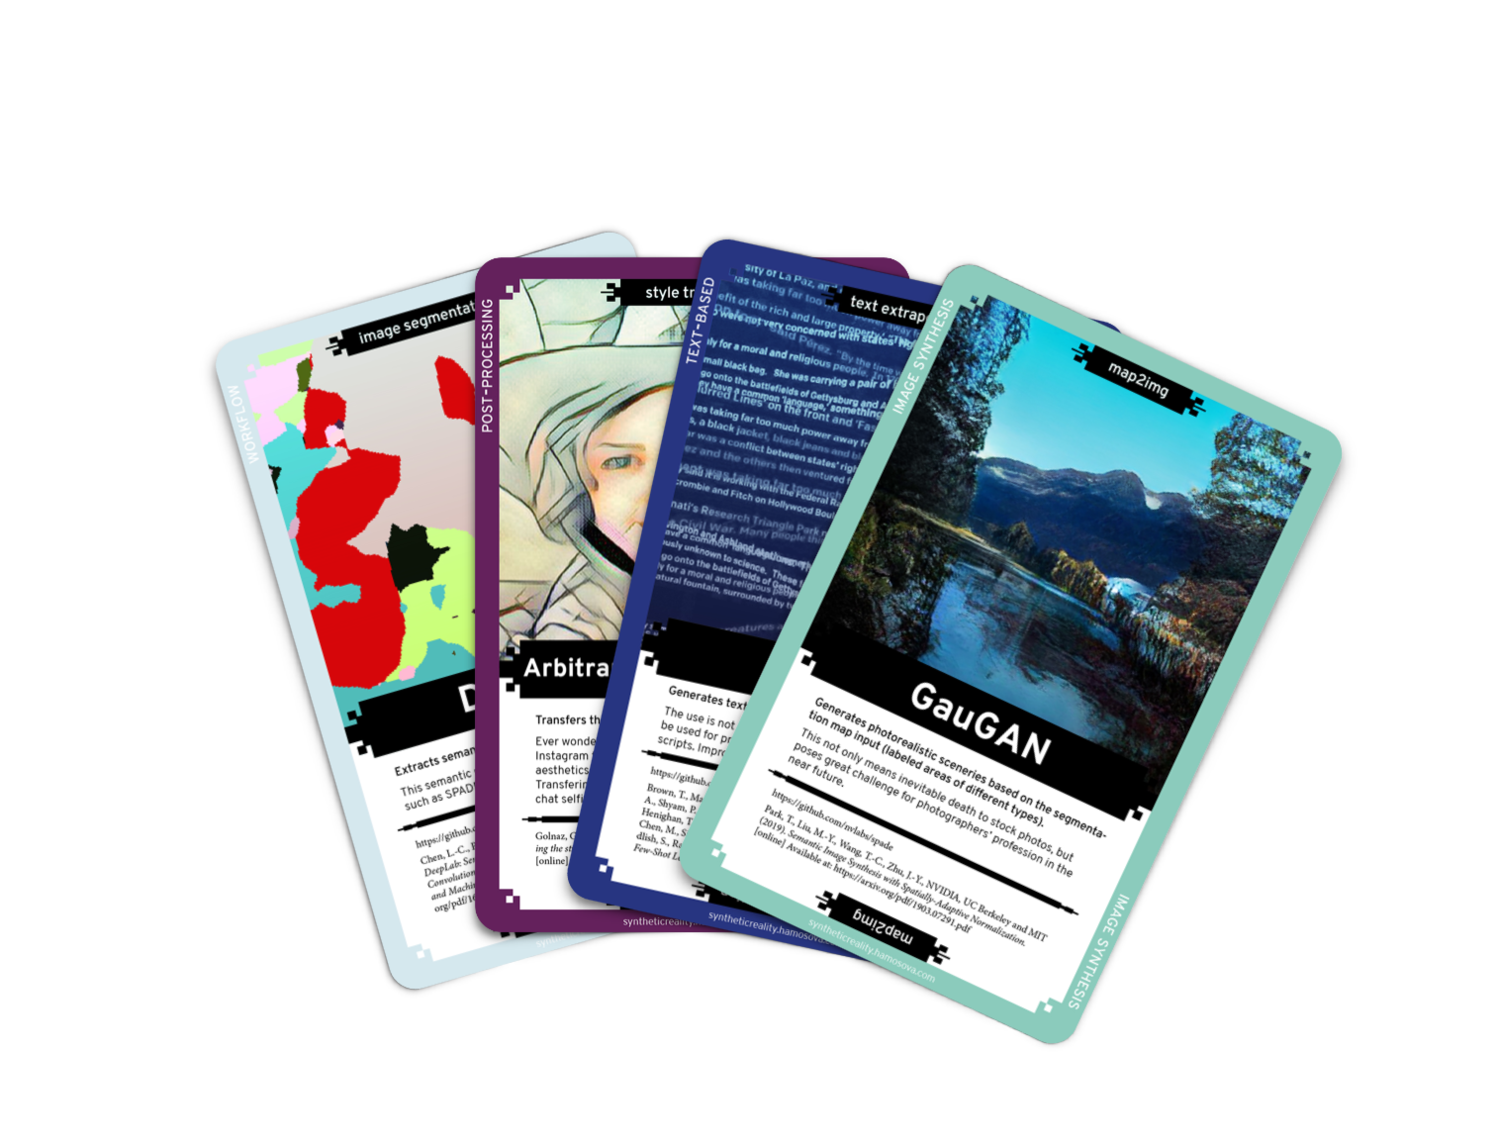 Collective Vision of Synthetic Reality | Digital Card Deck